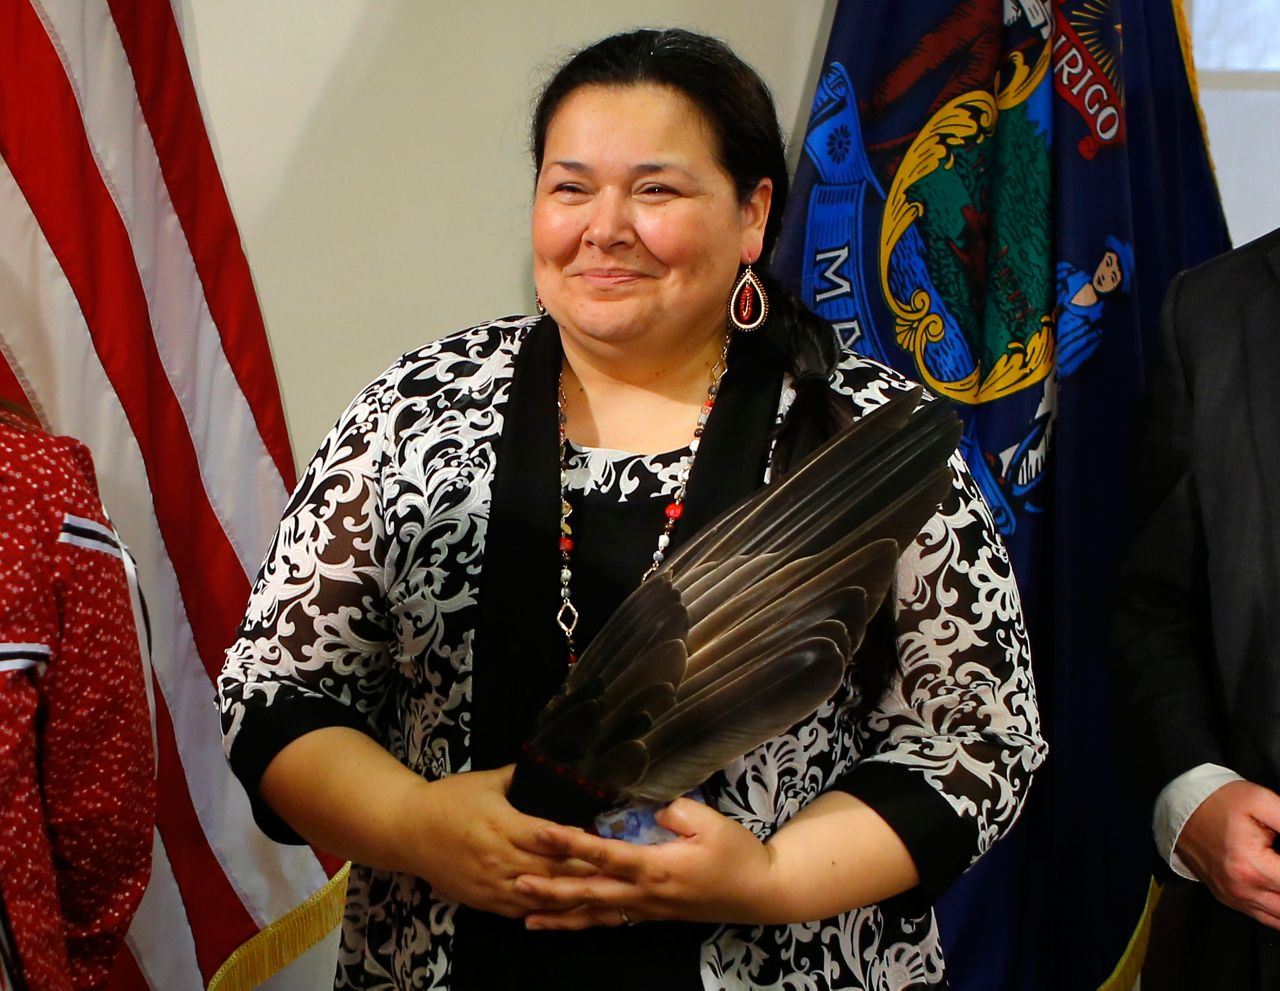 Clarissa Sabattus, Tribal Chief of the Houlton Band of Maliseet Indians, holds eagle feathers during the signing ceremony to establish Indigenous Peoples' Day, Friday, April 26, 2019, at the State House in Augusta, Maine. Gov. Janet Mills signed the bill, adding Maine to the growing number of states who have passed similar legislation. (AP Photo/Robert F. Bukaty)